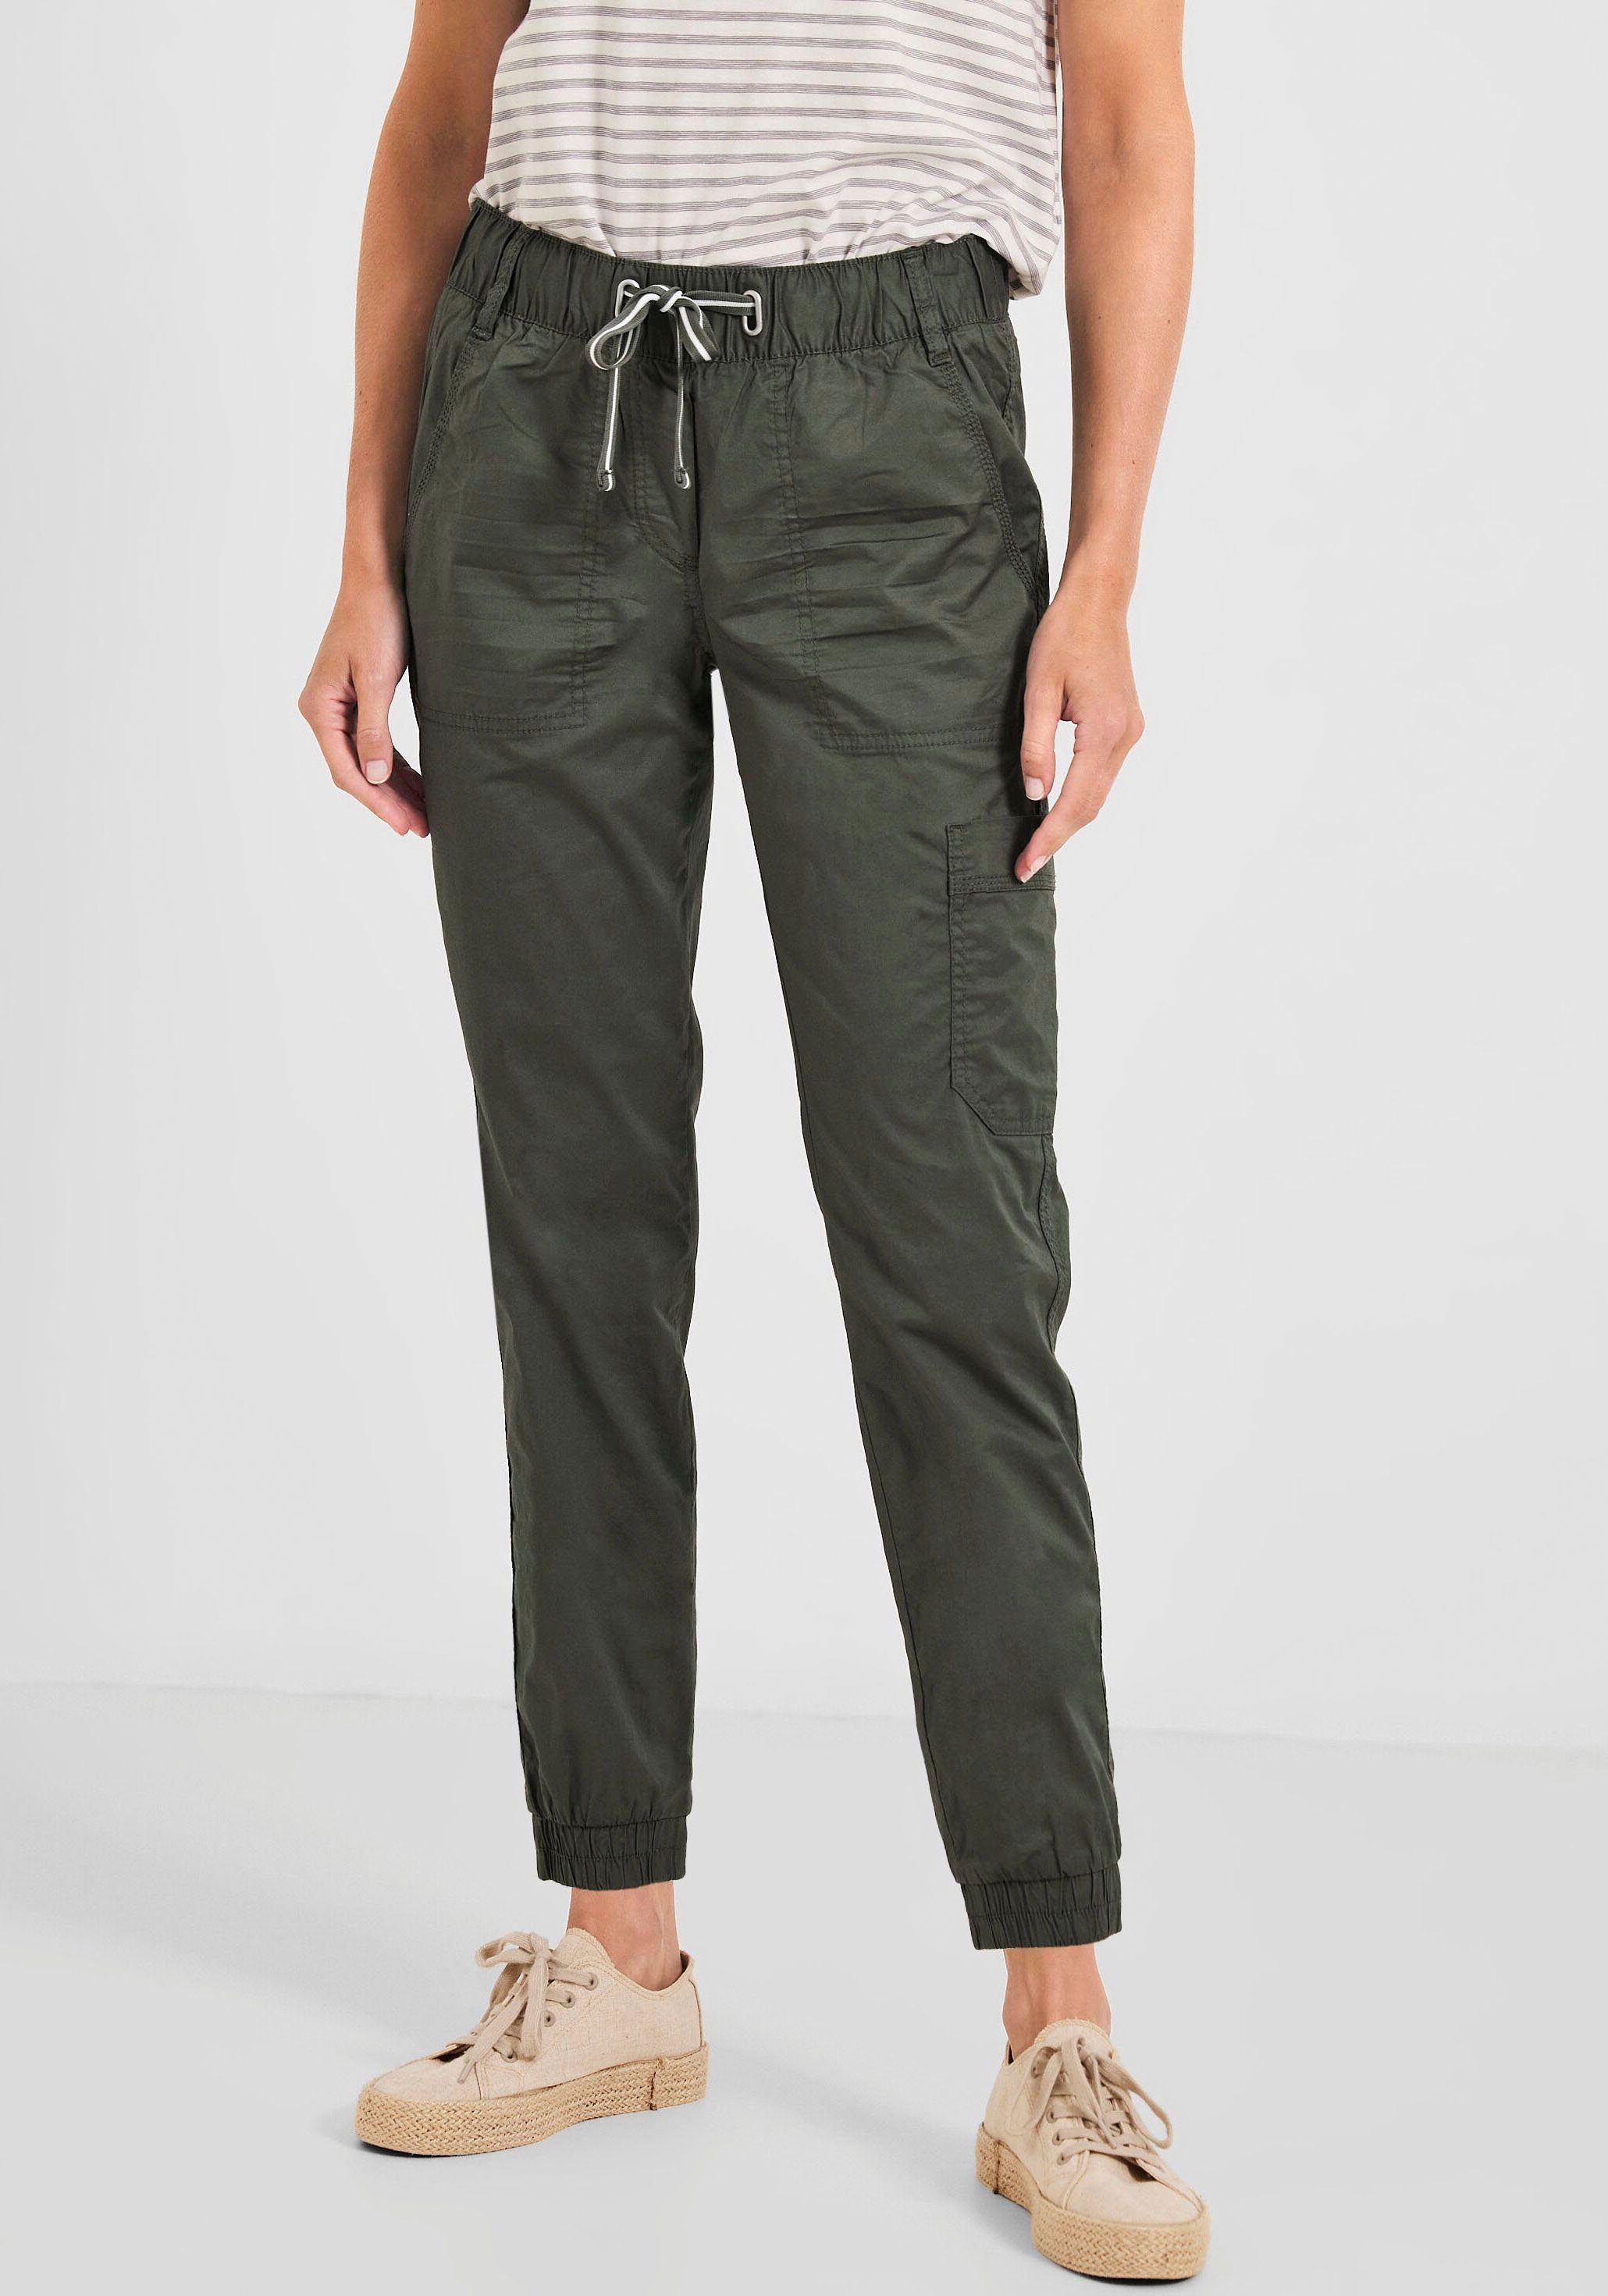 Tracey im khaki Cecil Outdoorhose Style sporty